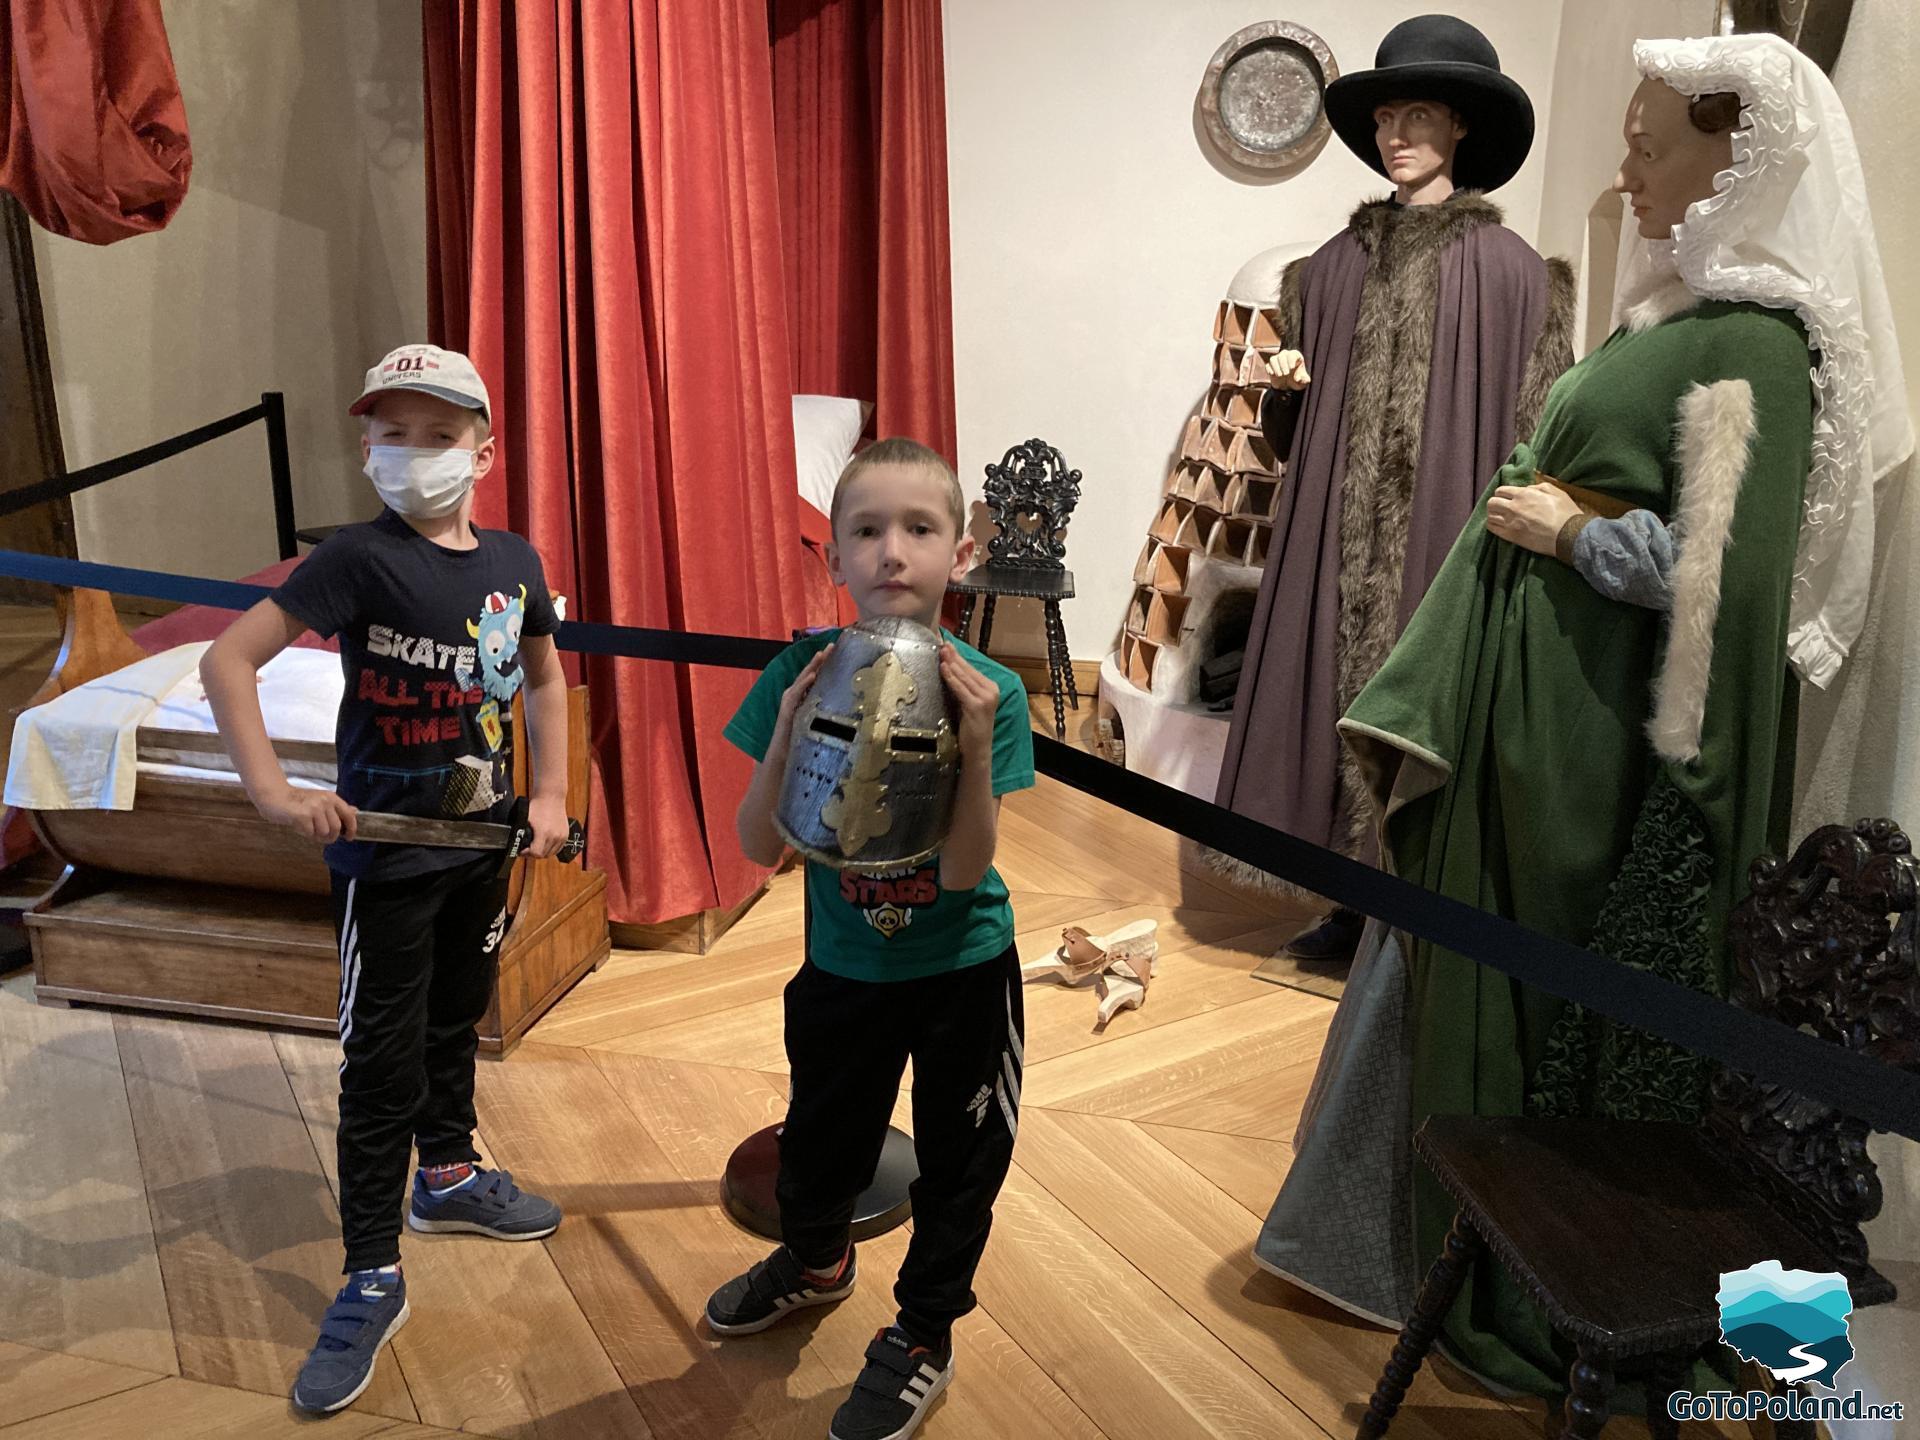 two boys are standing at the exhibition of medieval costumes